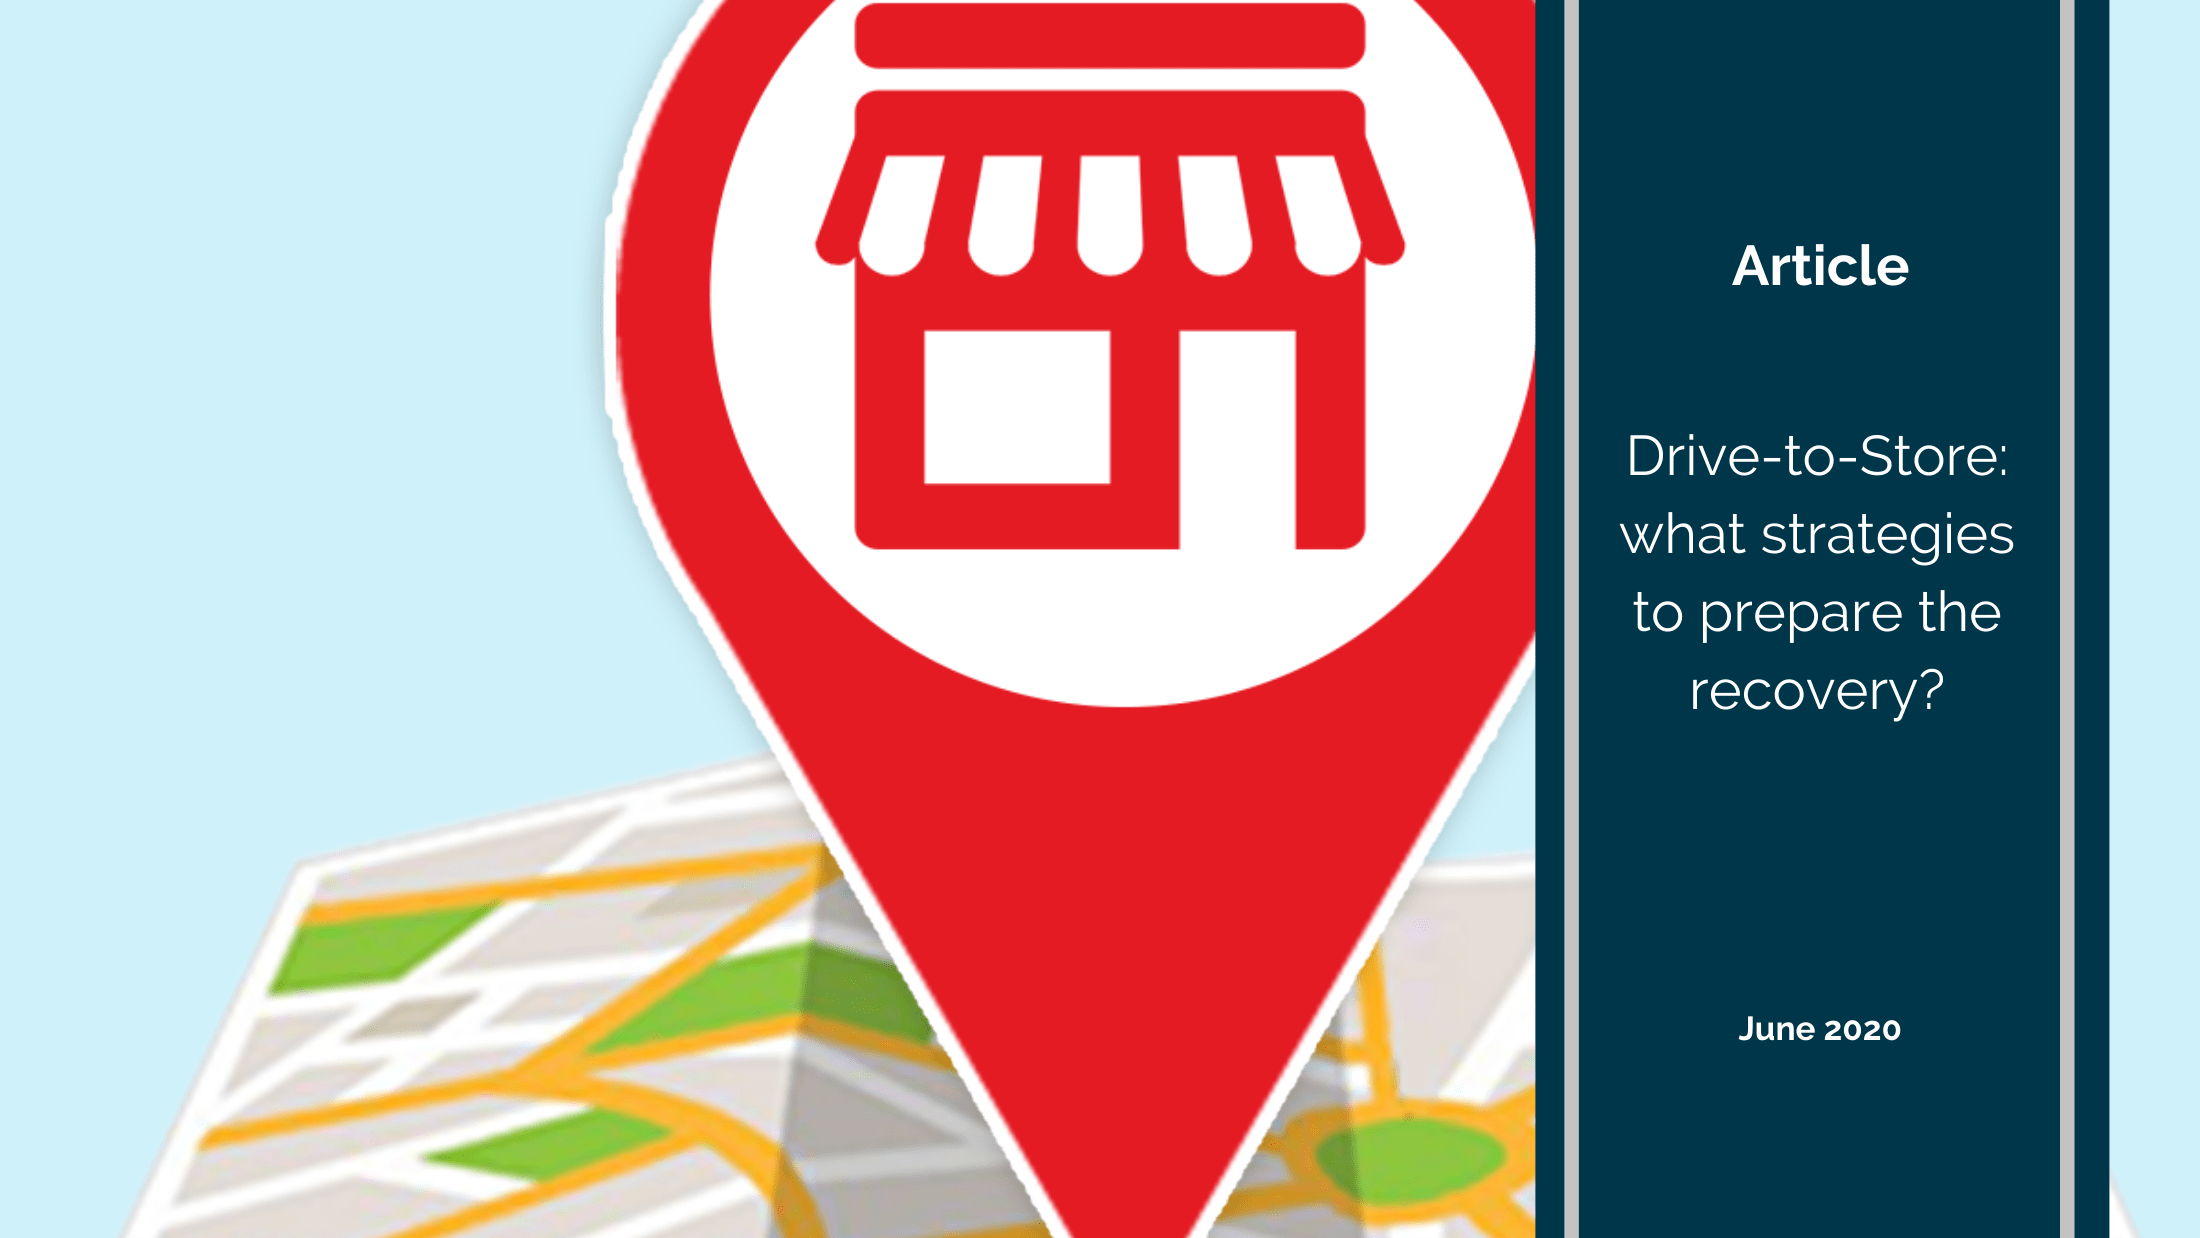 Expérience client 9 - Drive-to-store: what strategies to prepare the recovery?